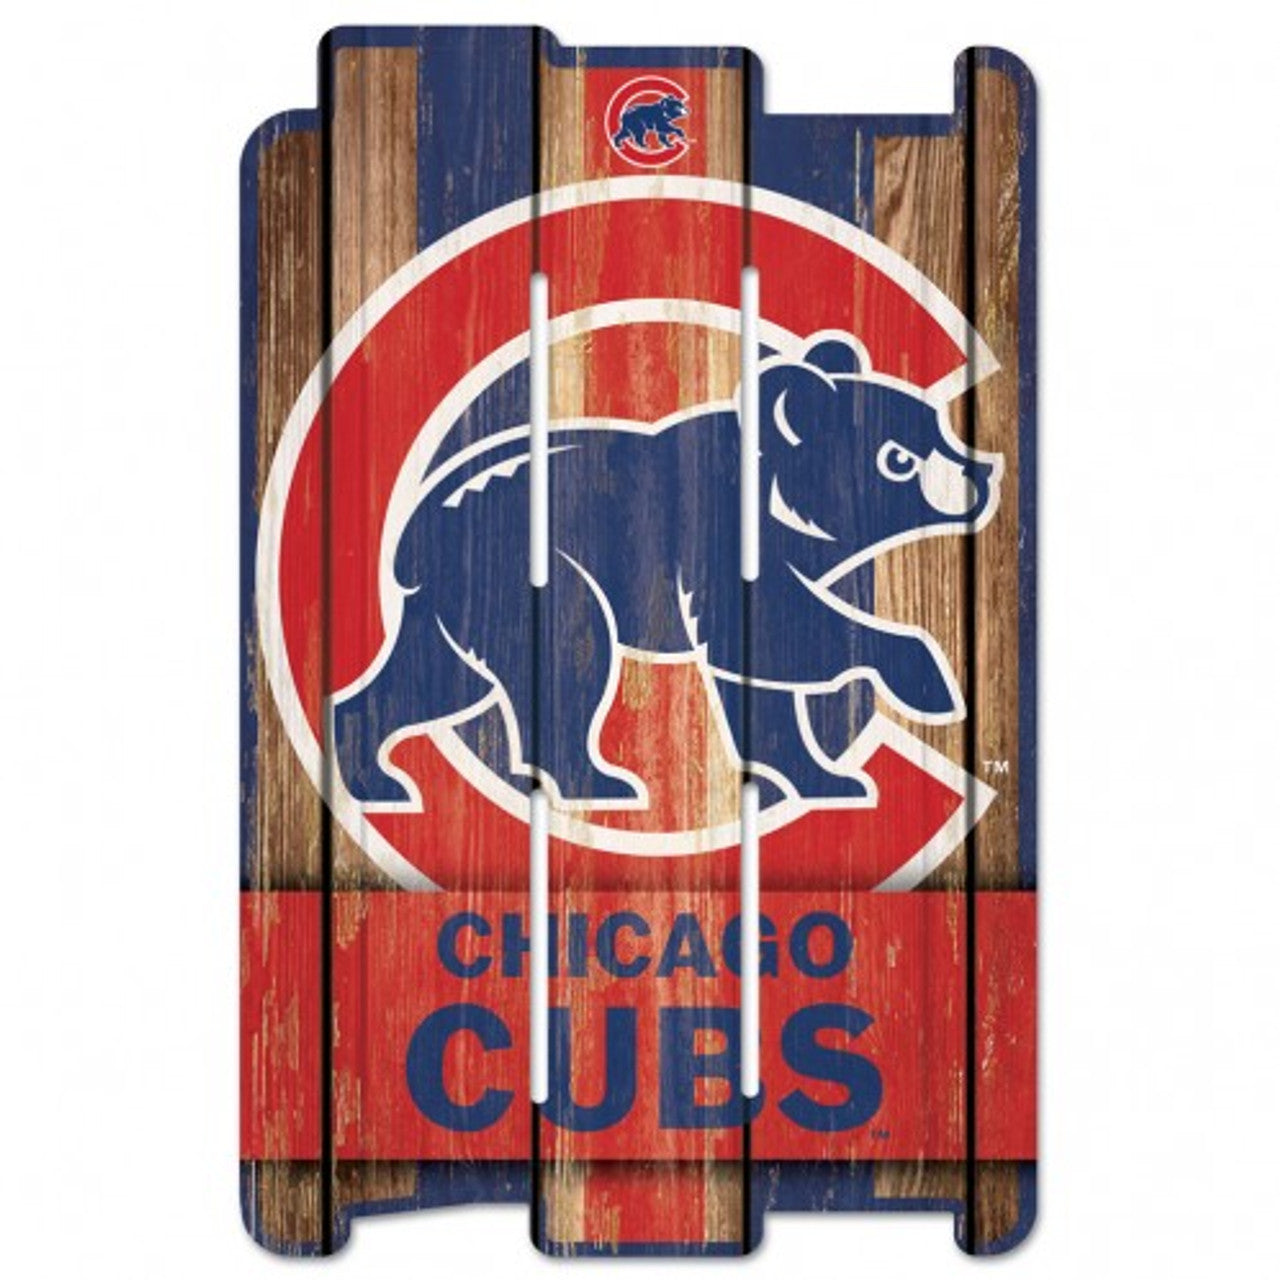 Chicago Cubs 11" x 17" Wood Fence Sign by Wincraft